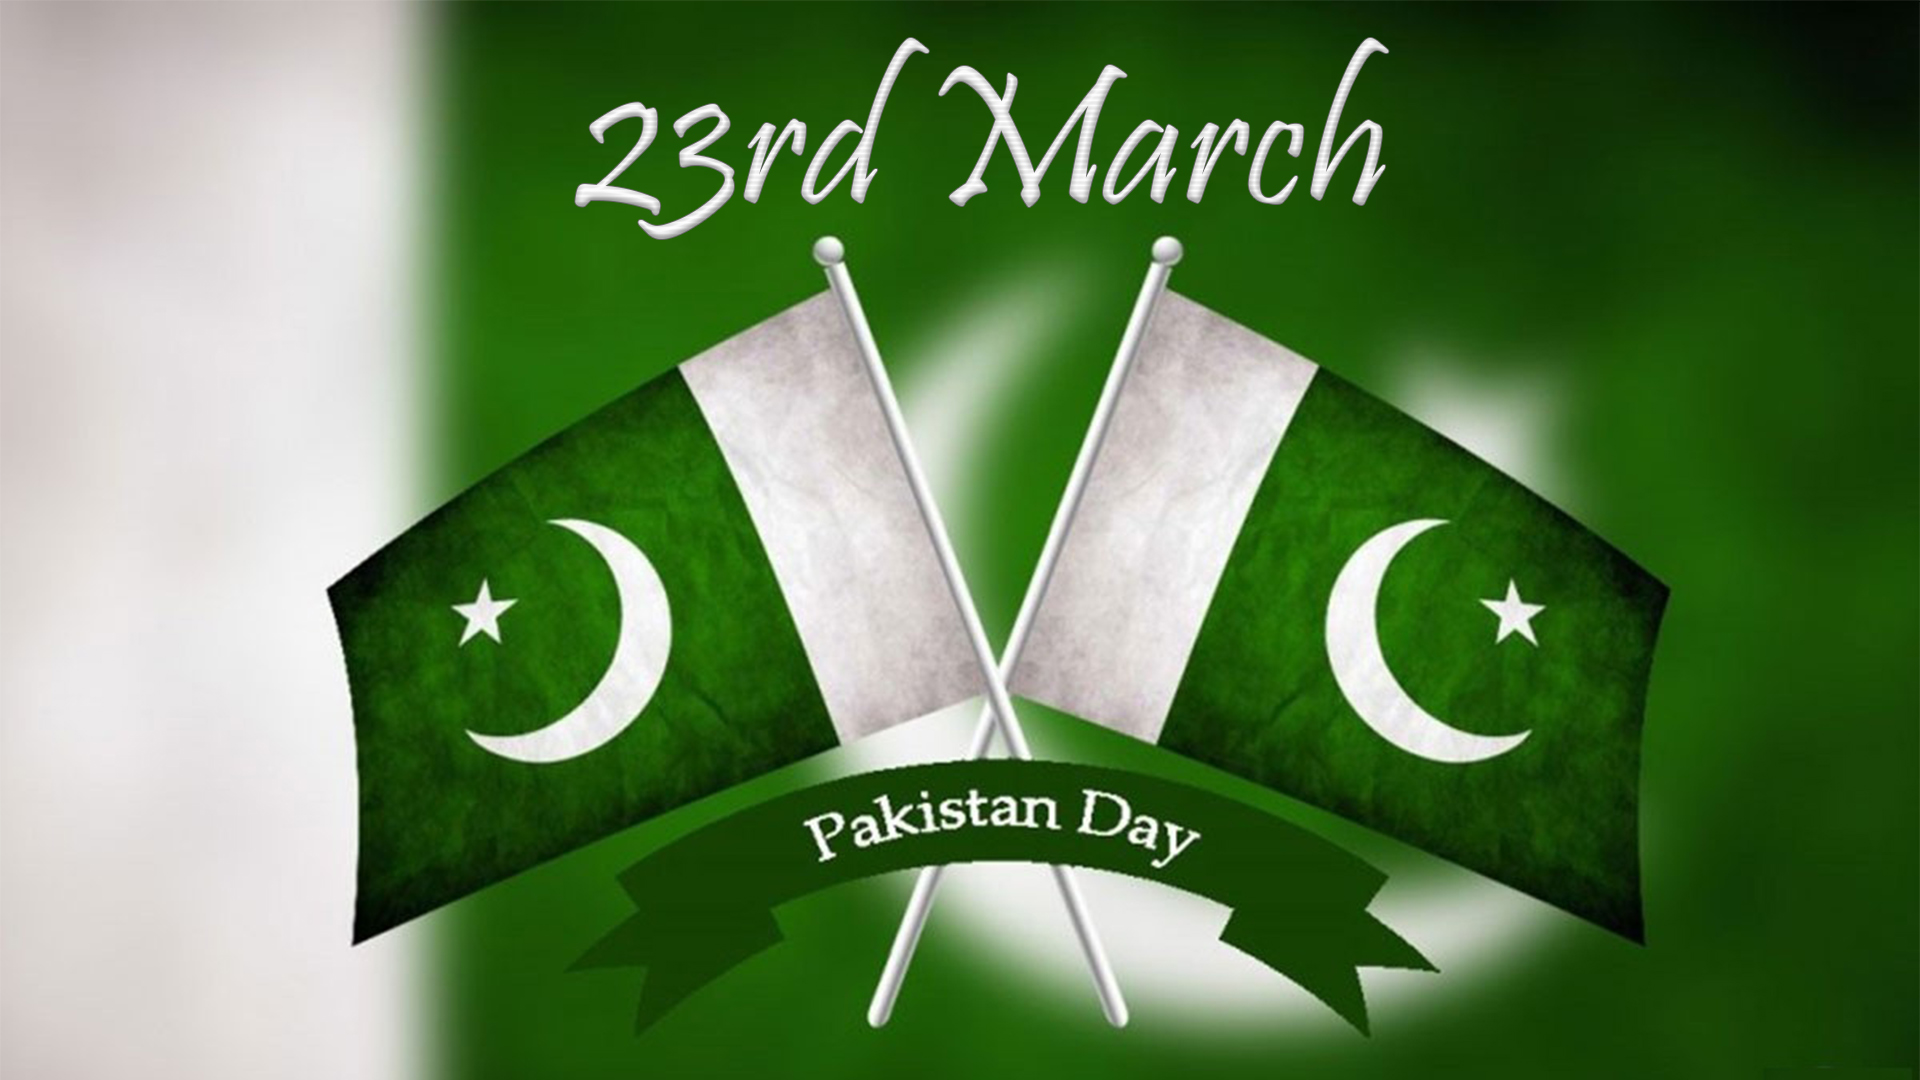 23rd march image